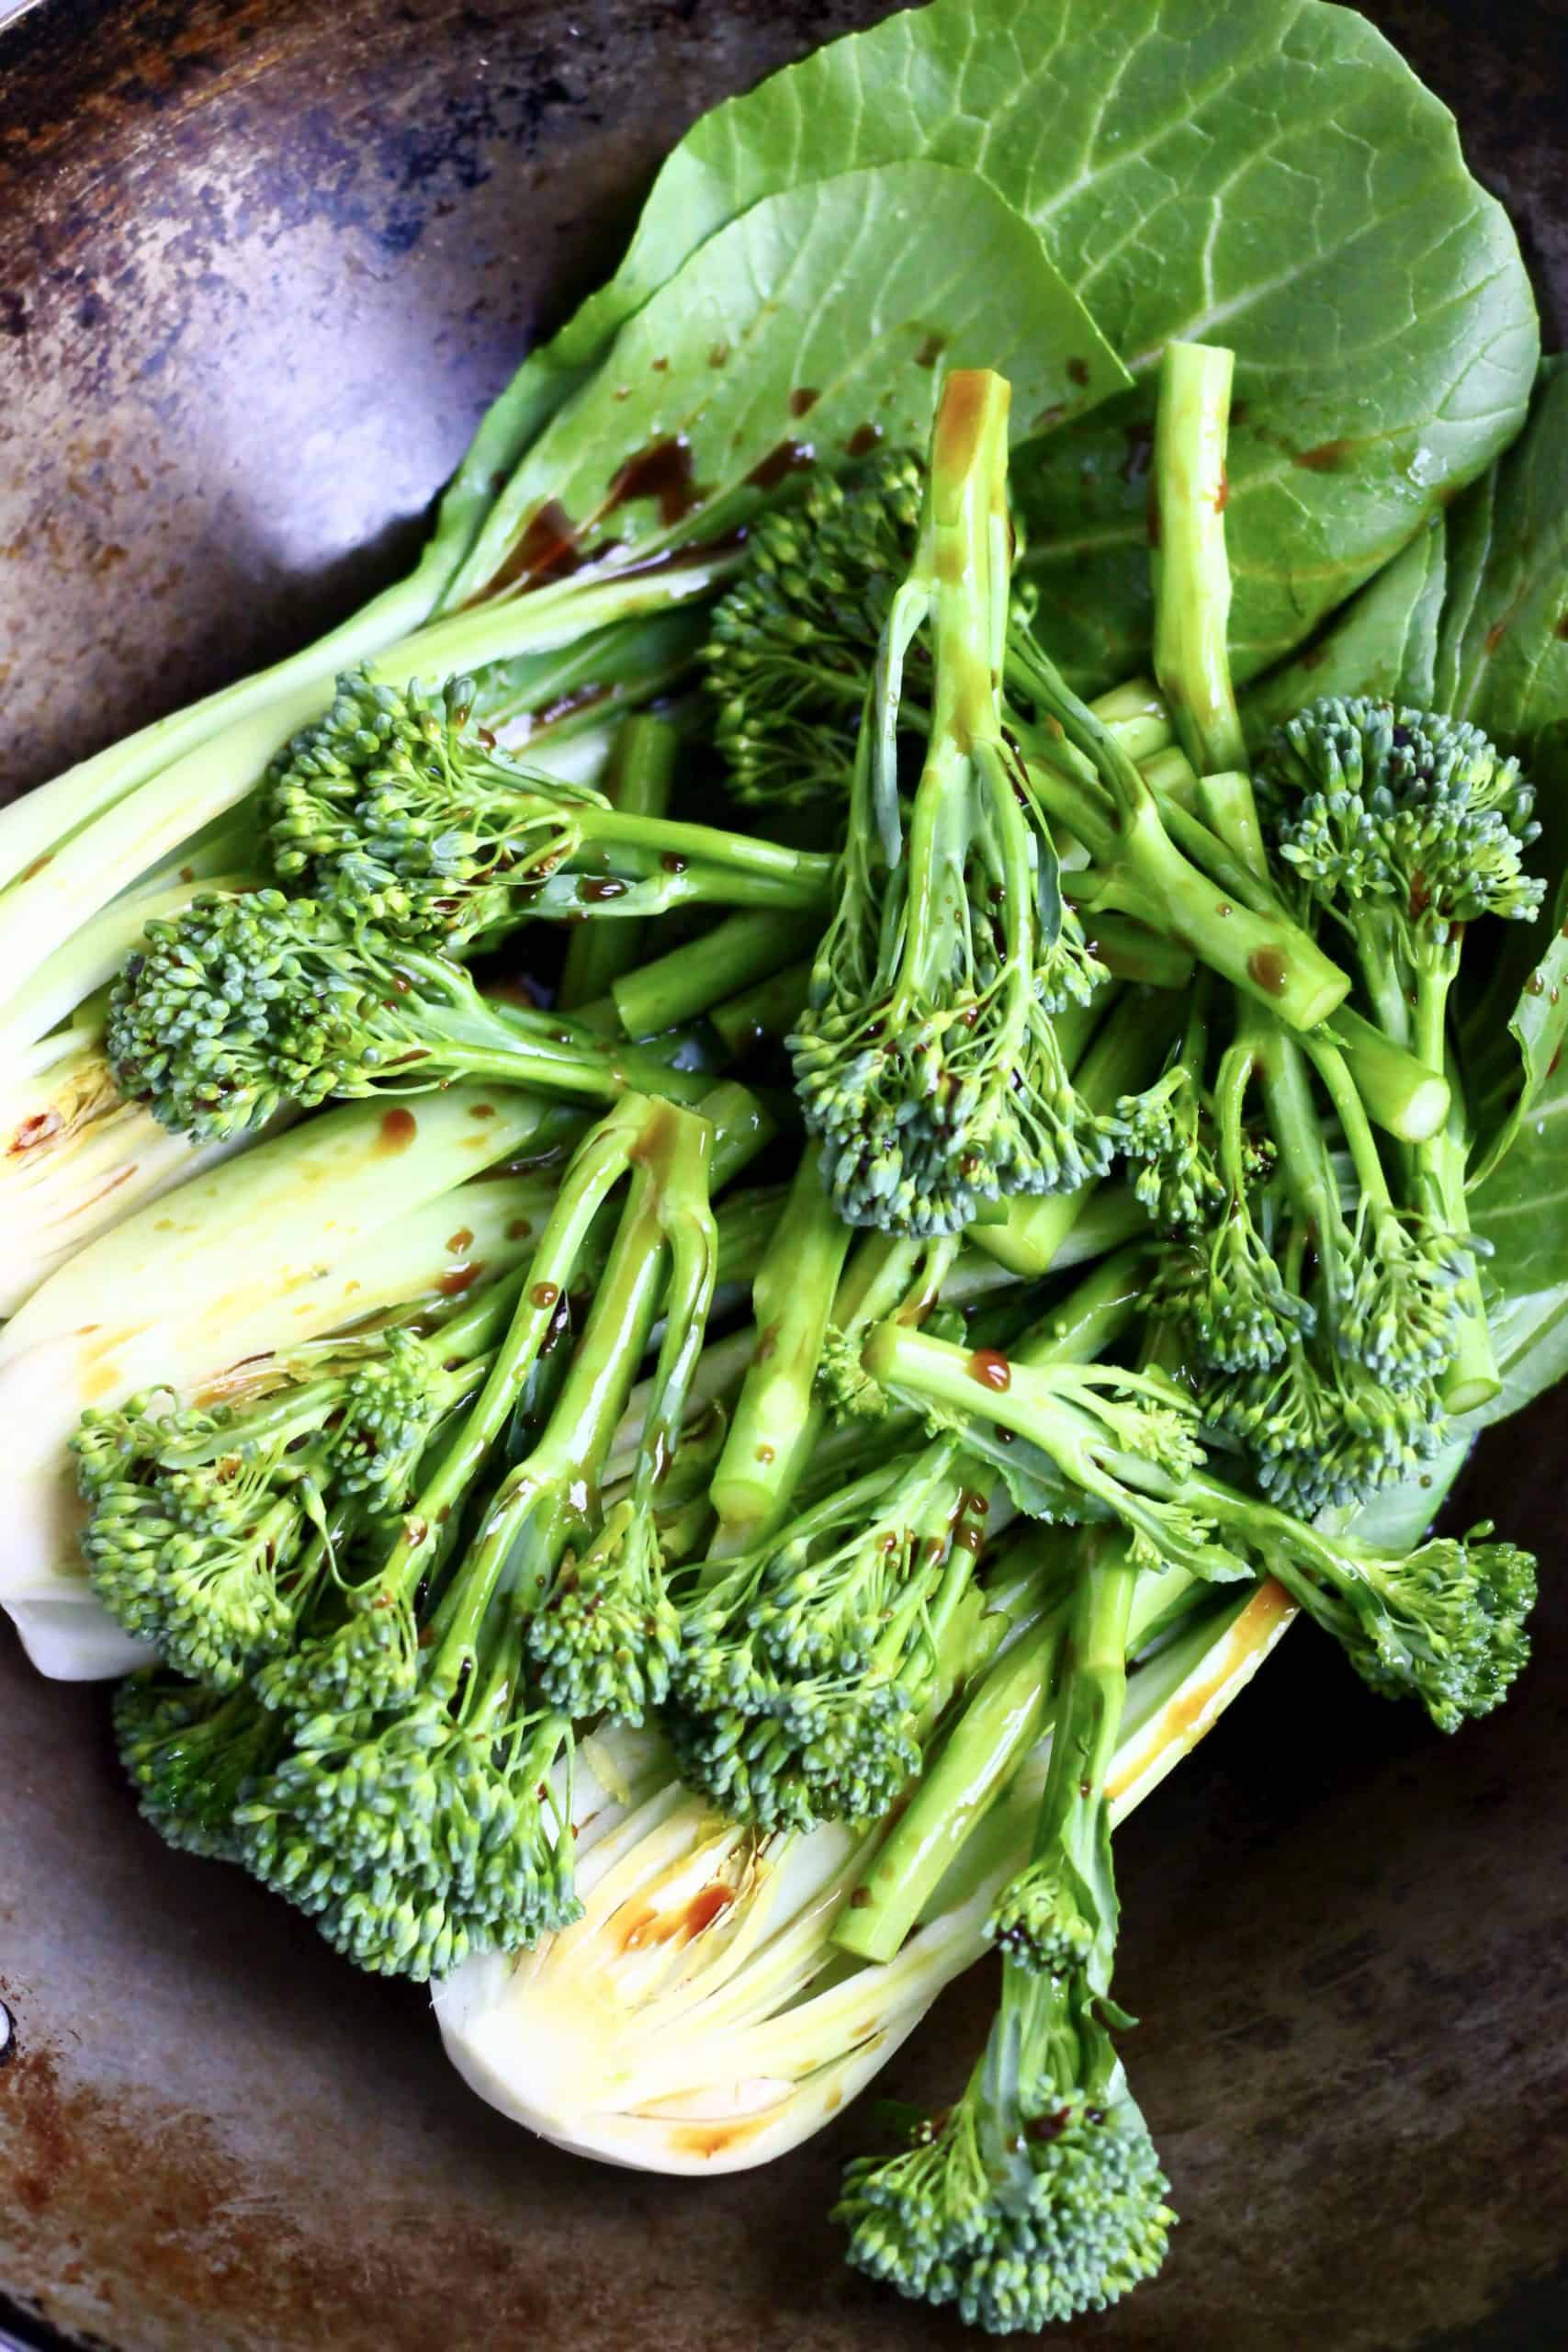 Raw tenderstem broccoli and pak choi with sauce in a black wok